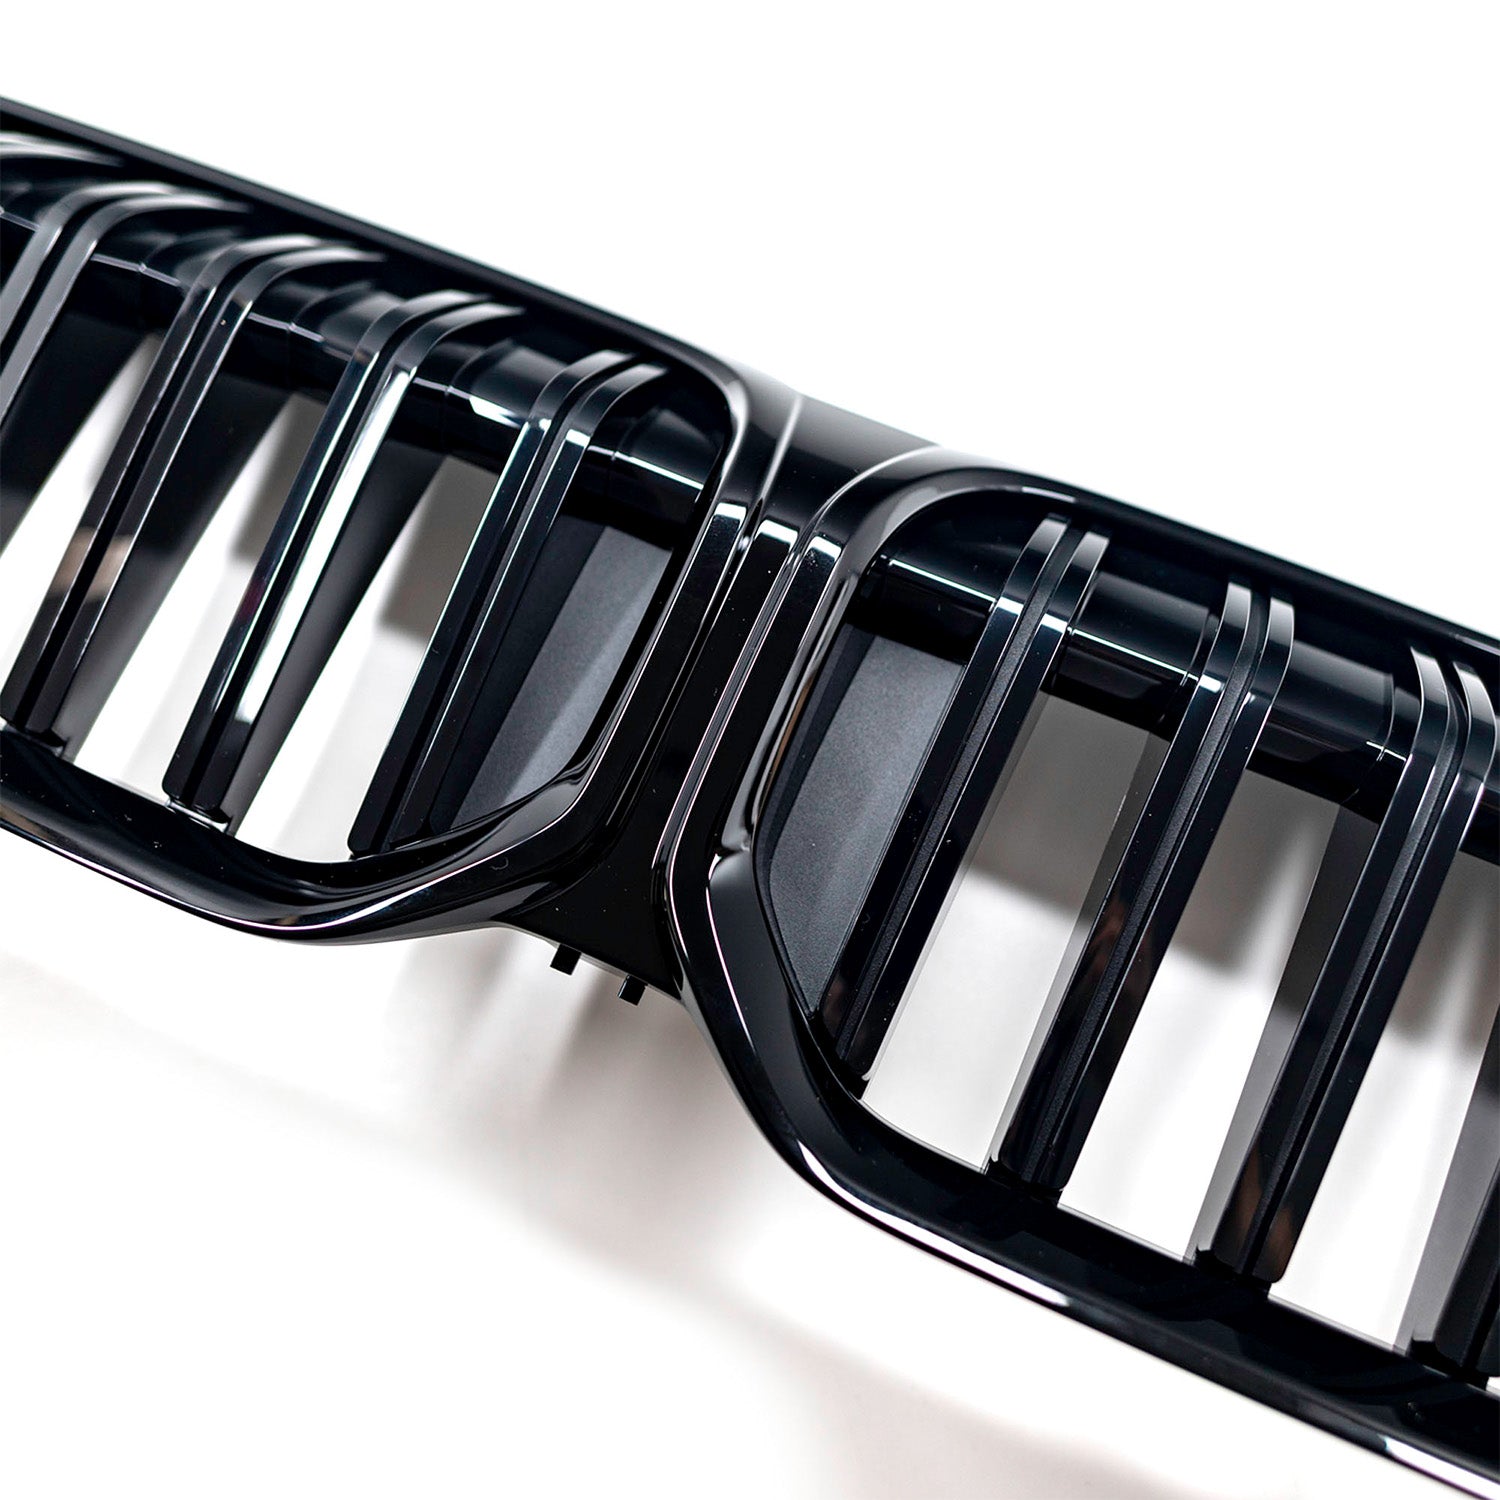 Genuine BMW G20 G21 3 Series LCI Front Grille In Gloss Black